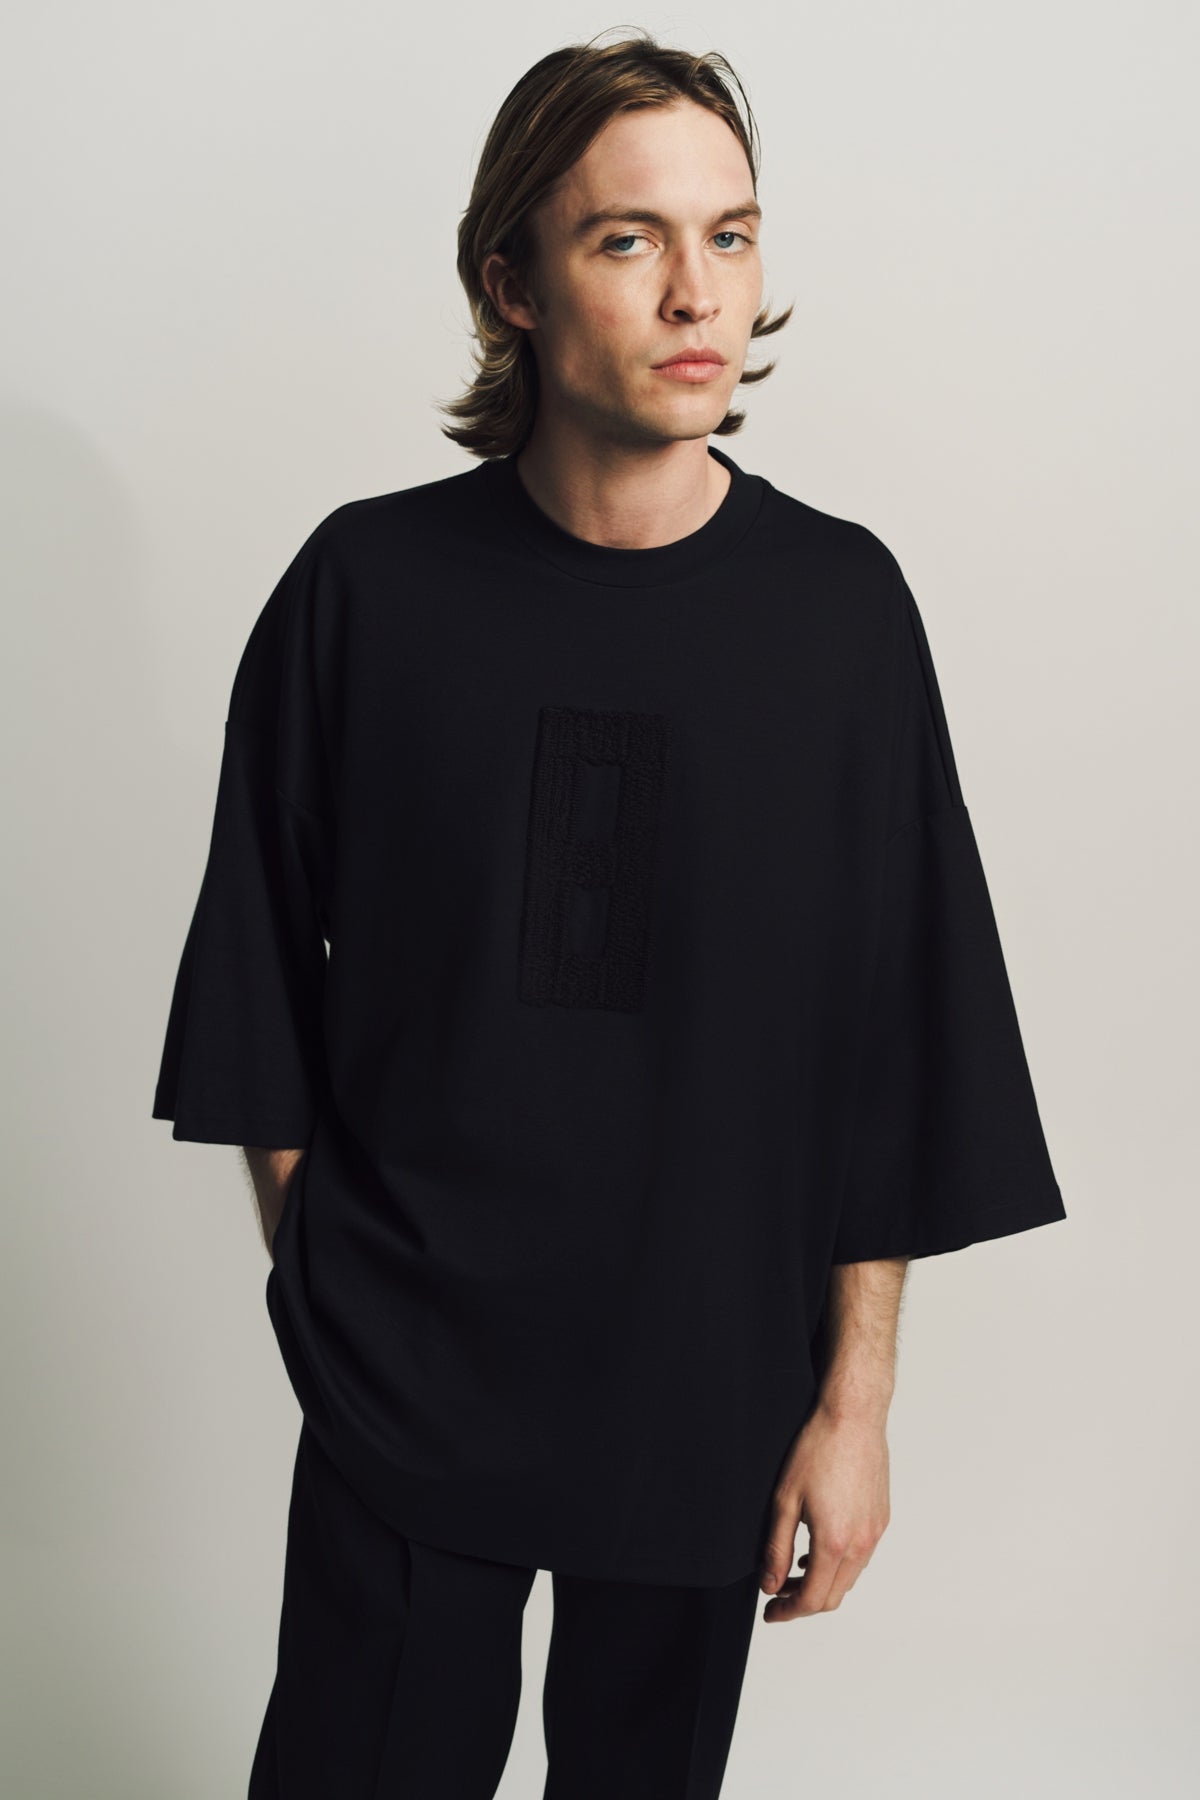 FEAR OF GOD | EMBROIDERED 8 MILANO TEE